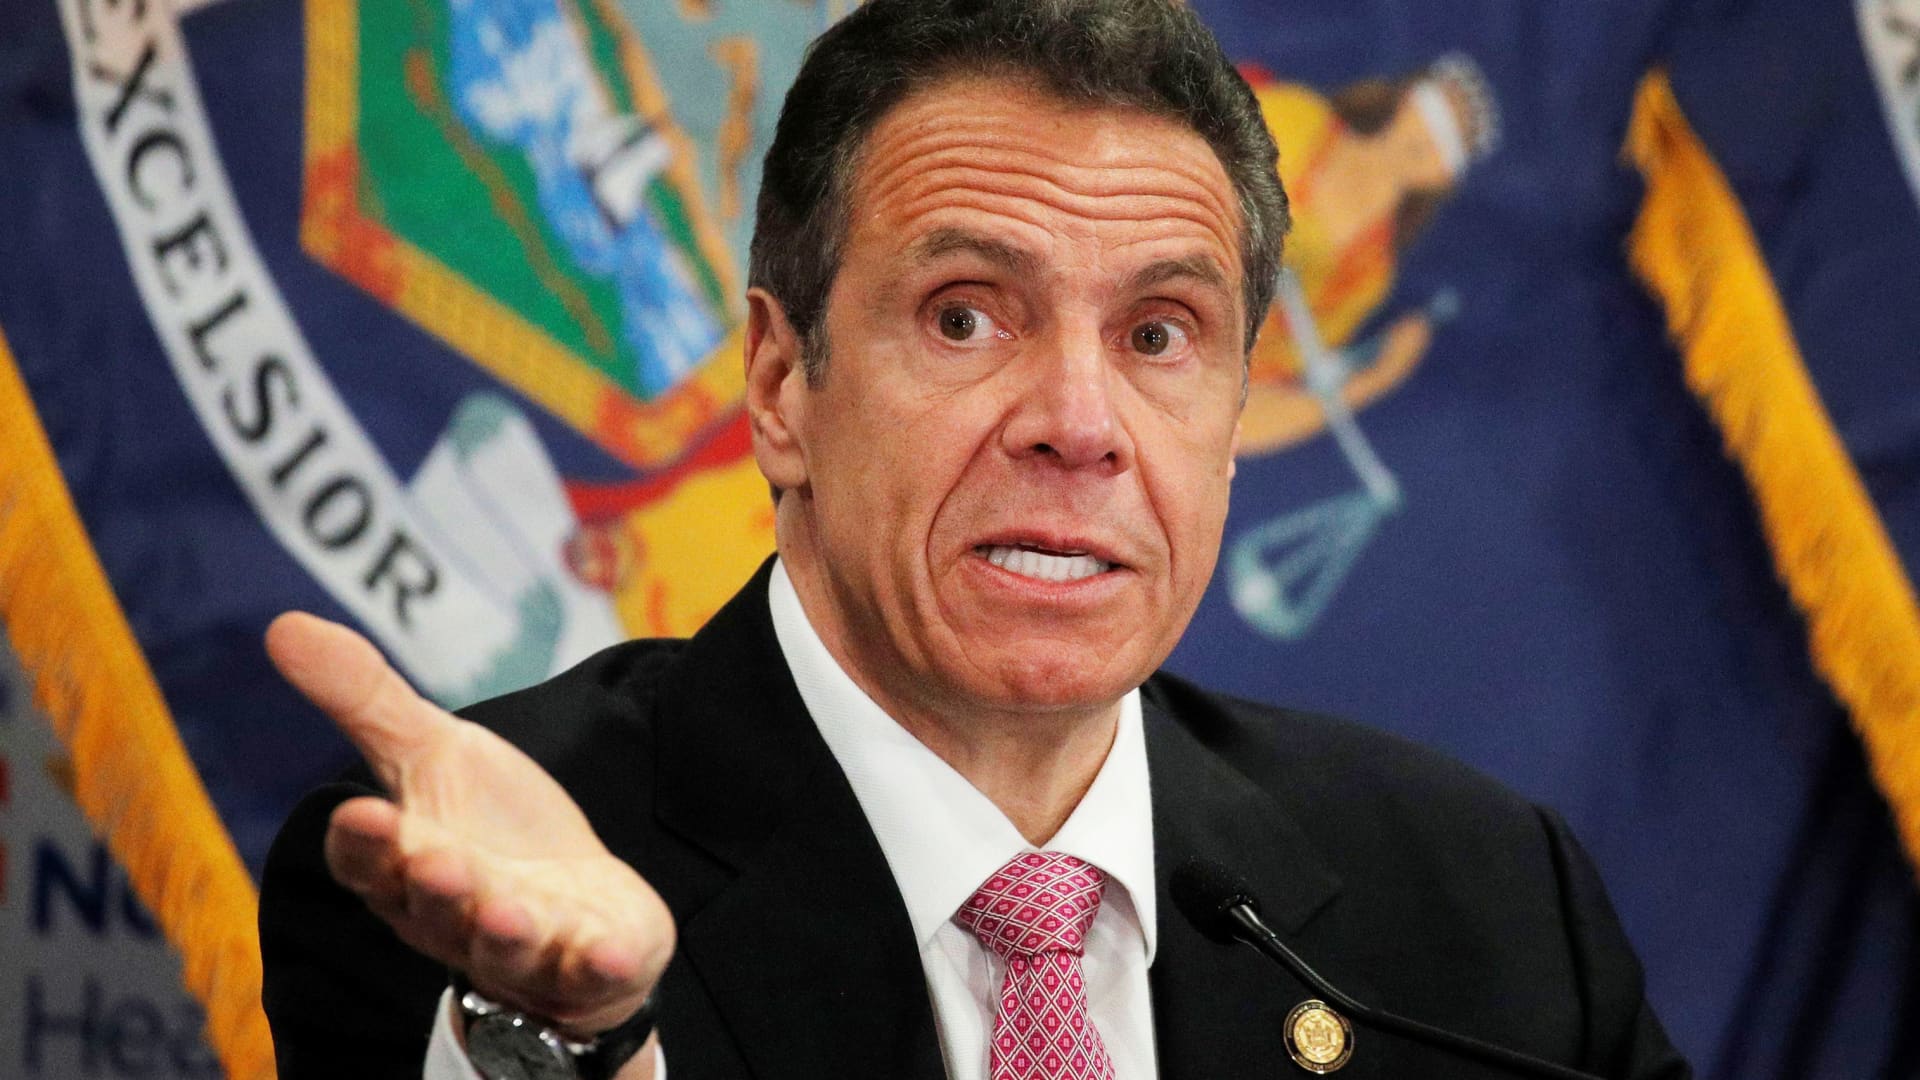 New York Governor Andrew Cuomo speaks at a daily briefing at North Shore University Hospital, during the outbreak of the coronavirus disease (COVID-19) in Manhasset, New York, May 6, 2020.